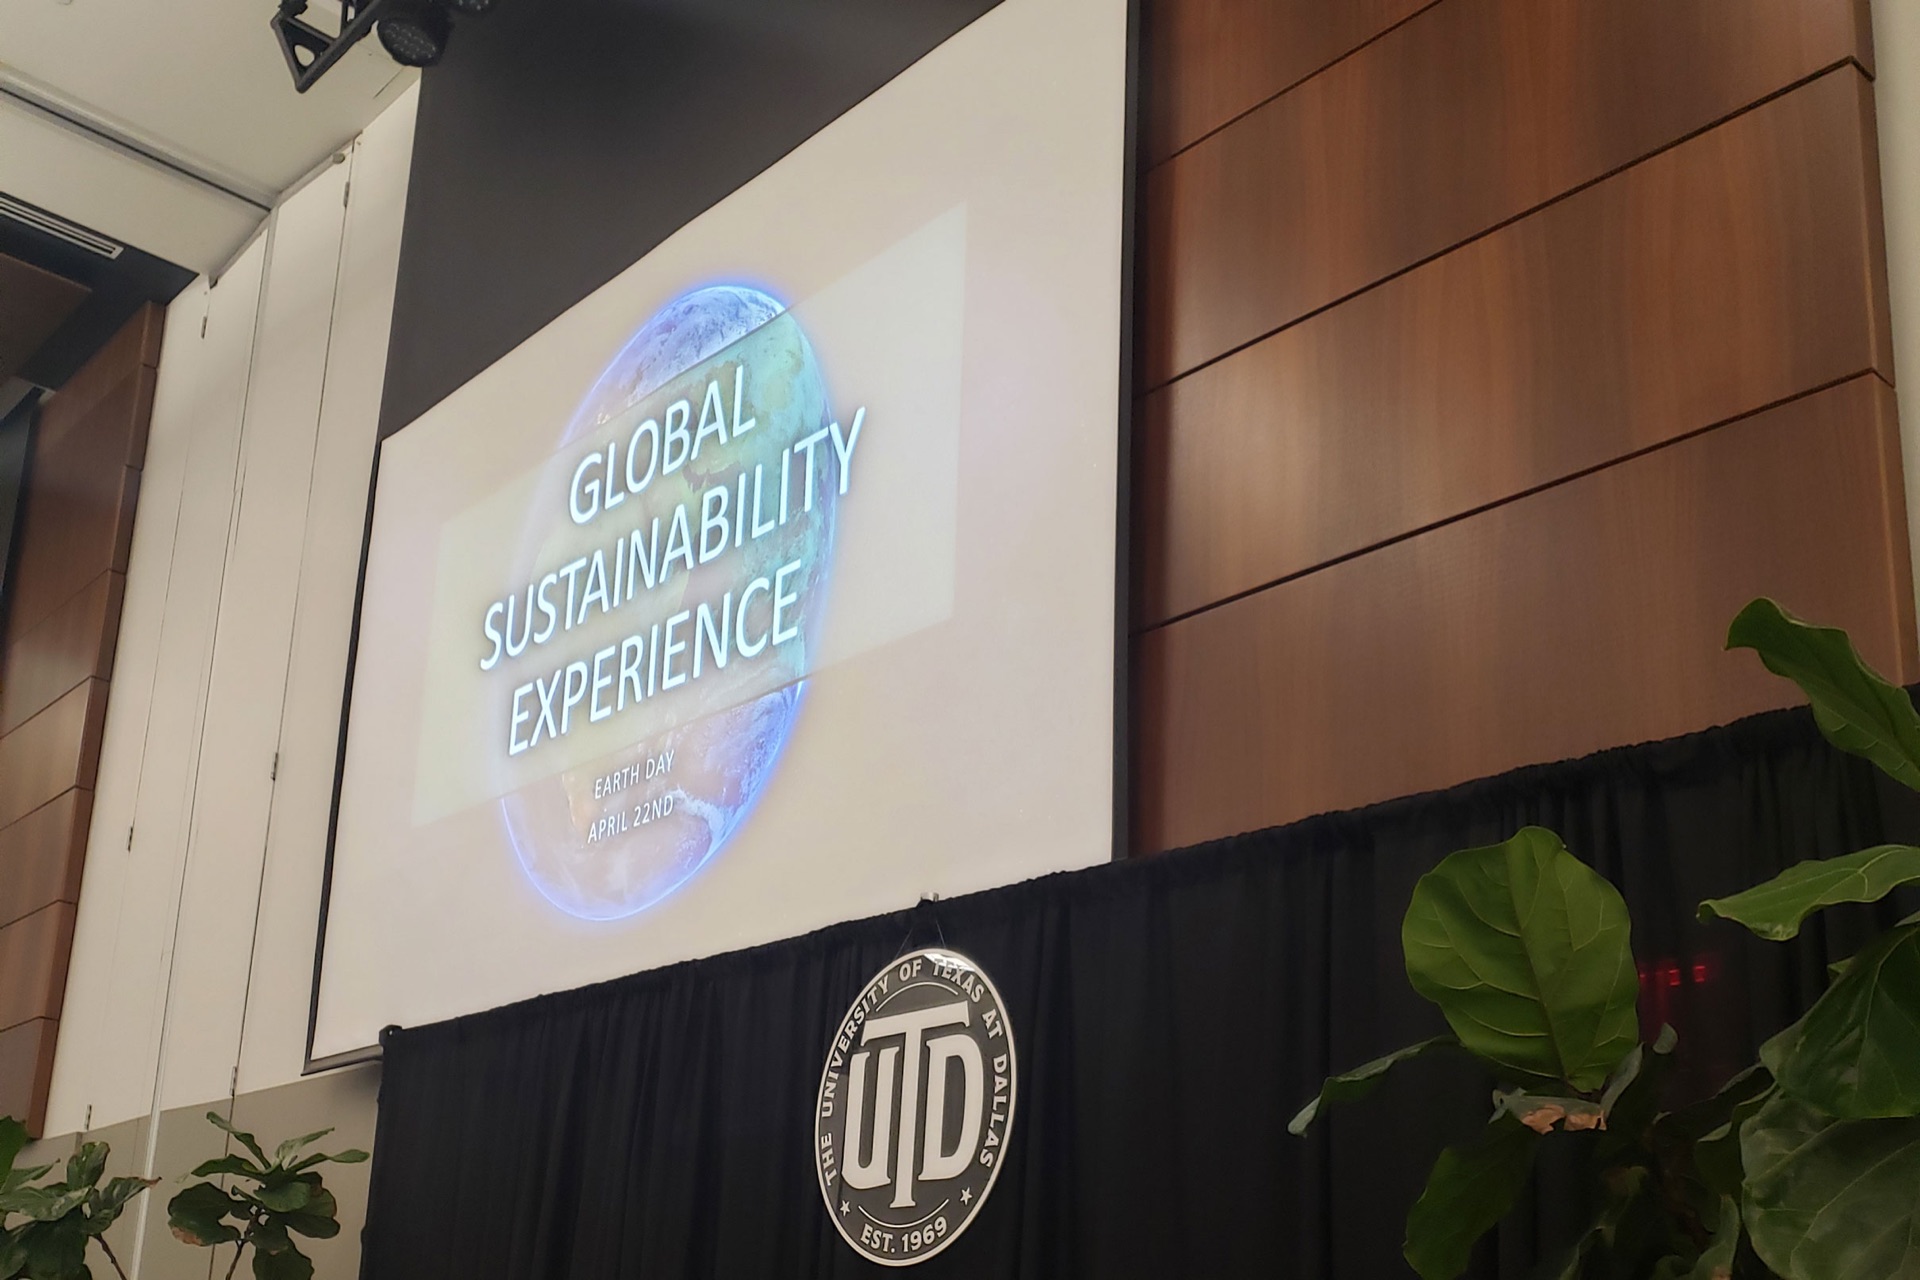 The inaugural Global Sustainability Experience